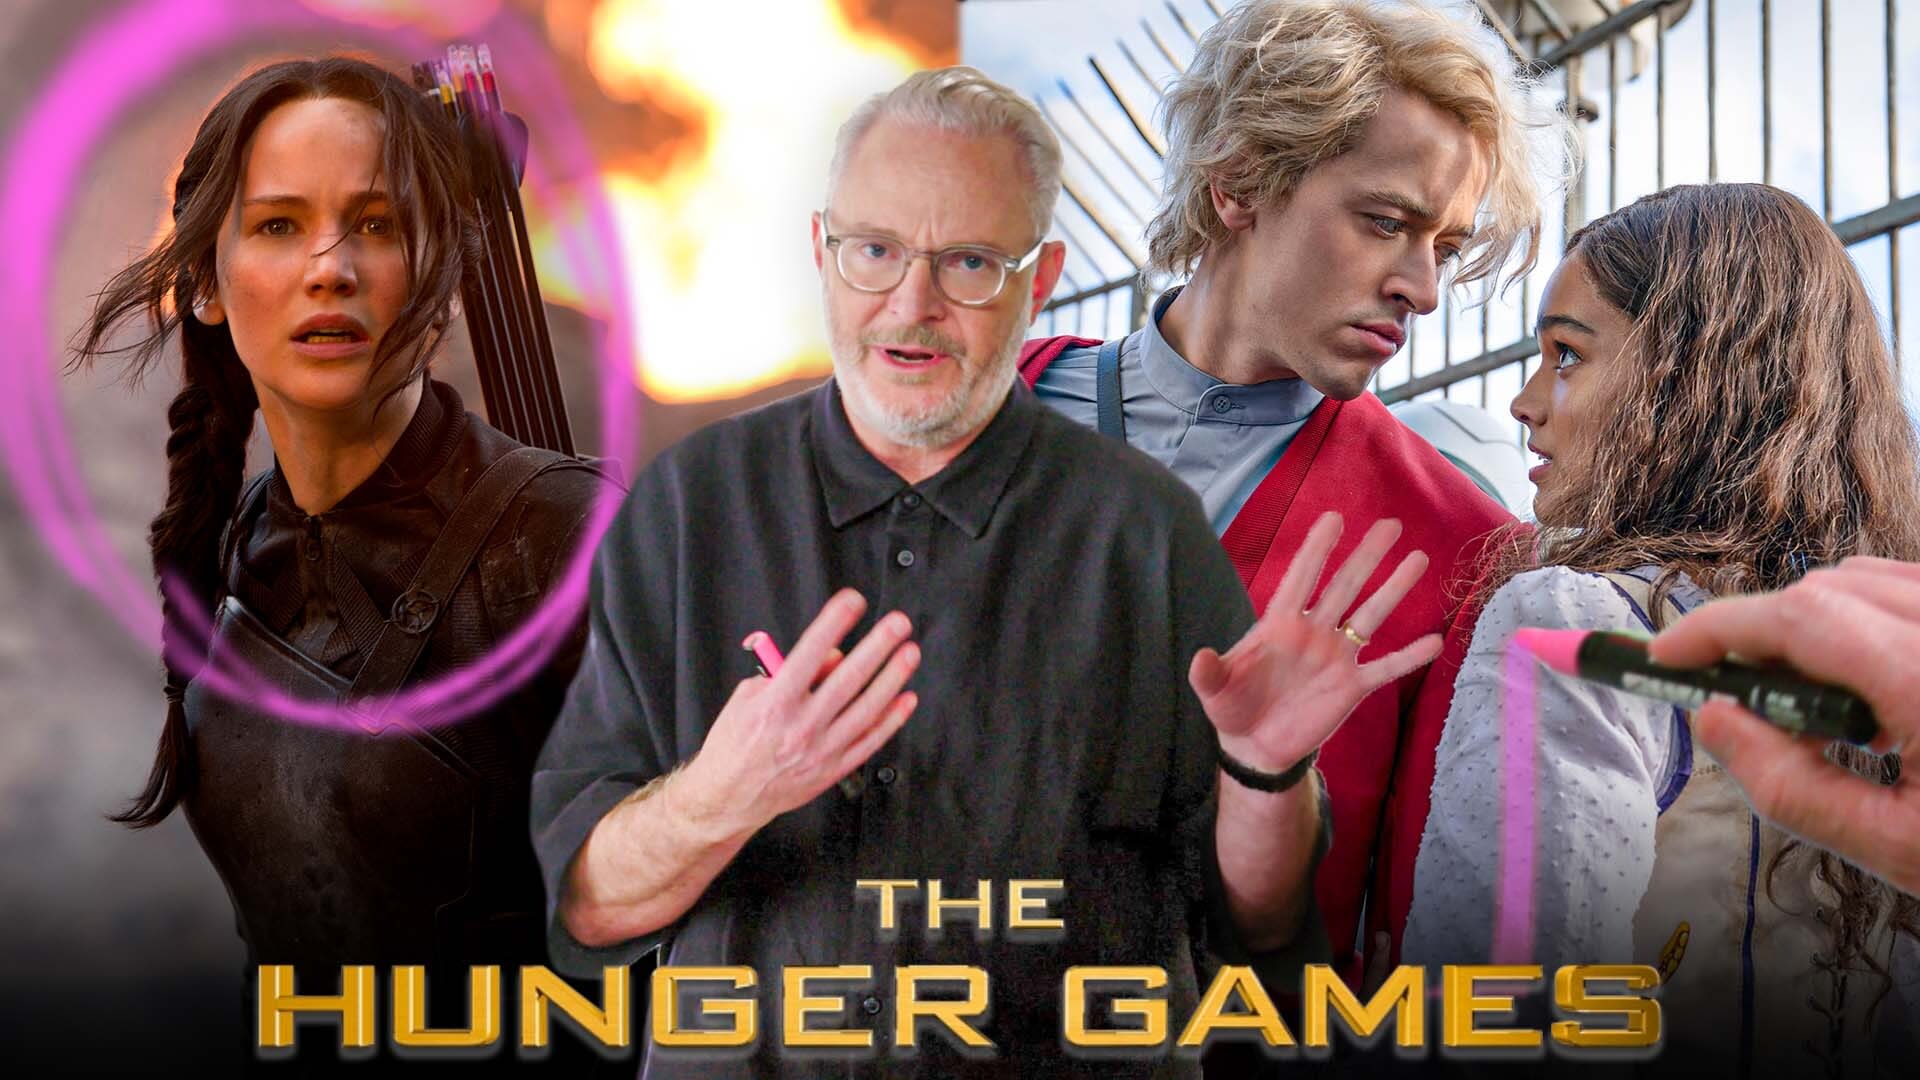 Watch: The Revoution Rises In New Trailer For 'The Hunger Games